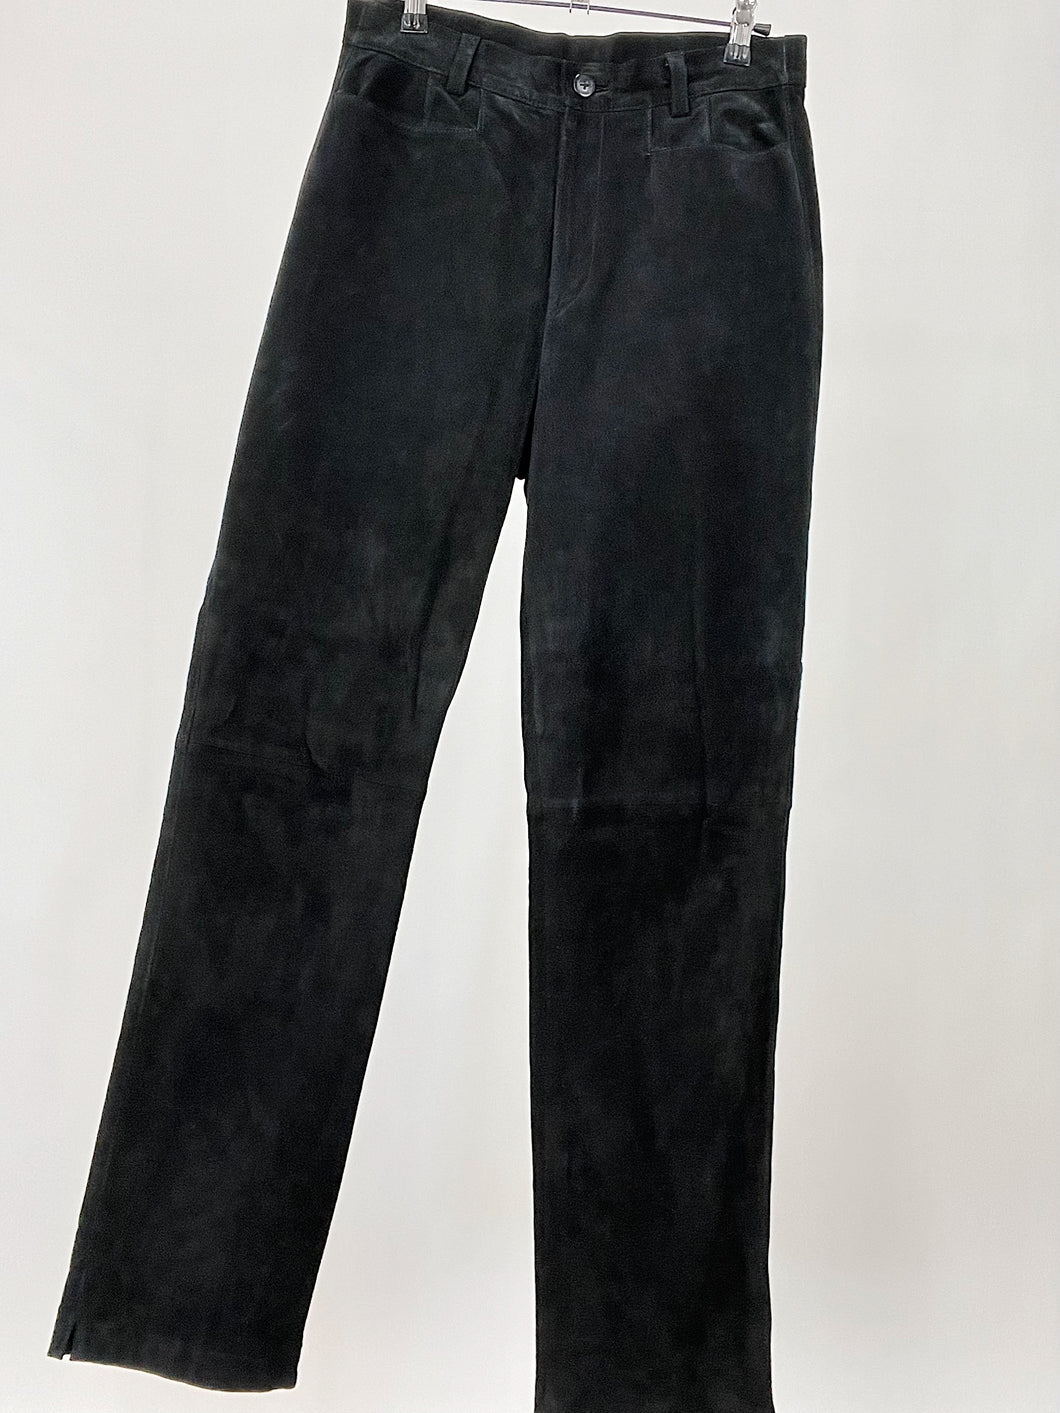 90s Black High Waisted Suede Pants (W29